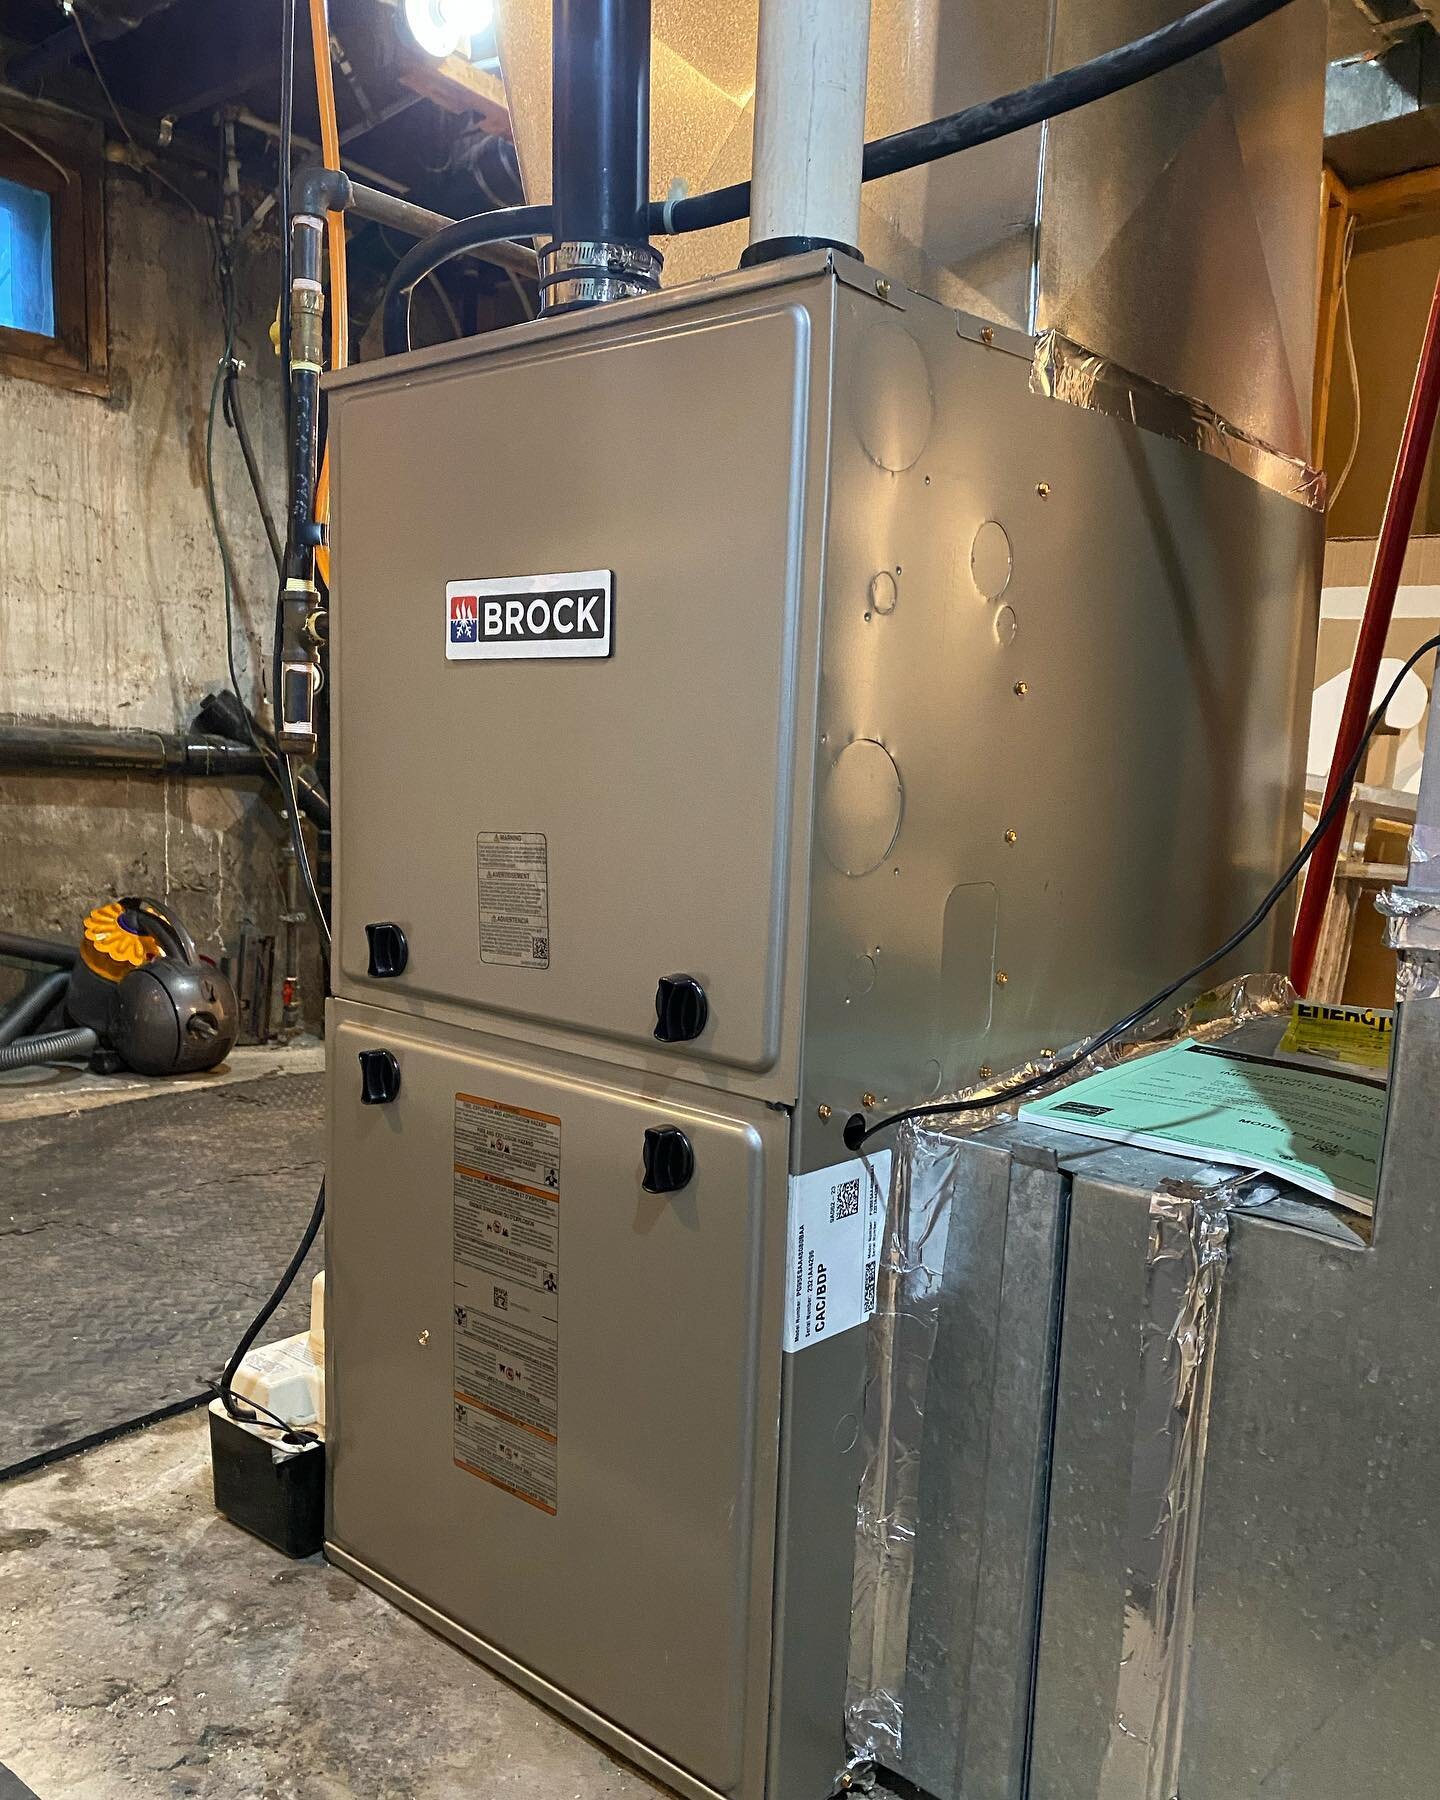 Tis&rsquo; the season for furnace OVERDRIVE 🔥
&bull;
If you&rsquo;re wondering what kind of shape your furnace is in or if it needs a tune-up to run smoothly this chilly season - give us a call!
&bull;
We&rsquo;ll make sure you stay warm over the ho